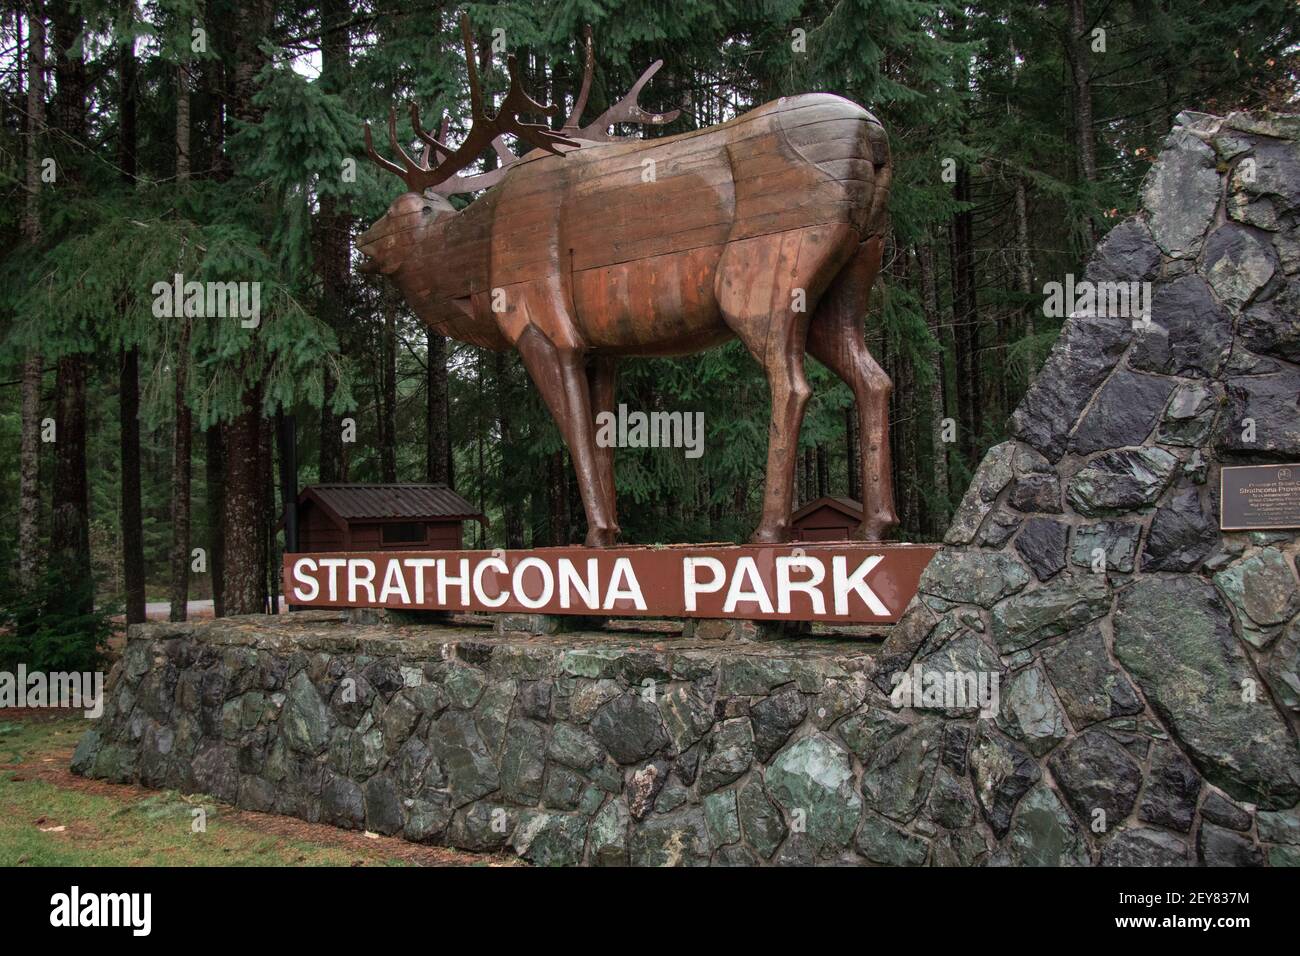 Vancouver Island, Canada - November 17,2020: View of welcome sign Strathcona Park with forest in the background Stock Photo